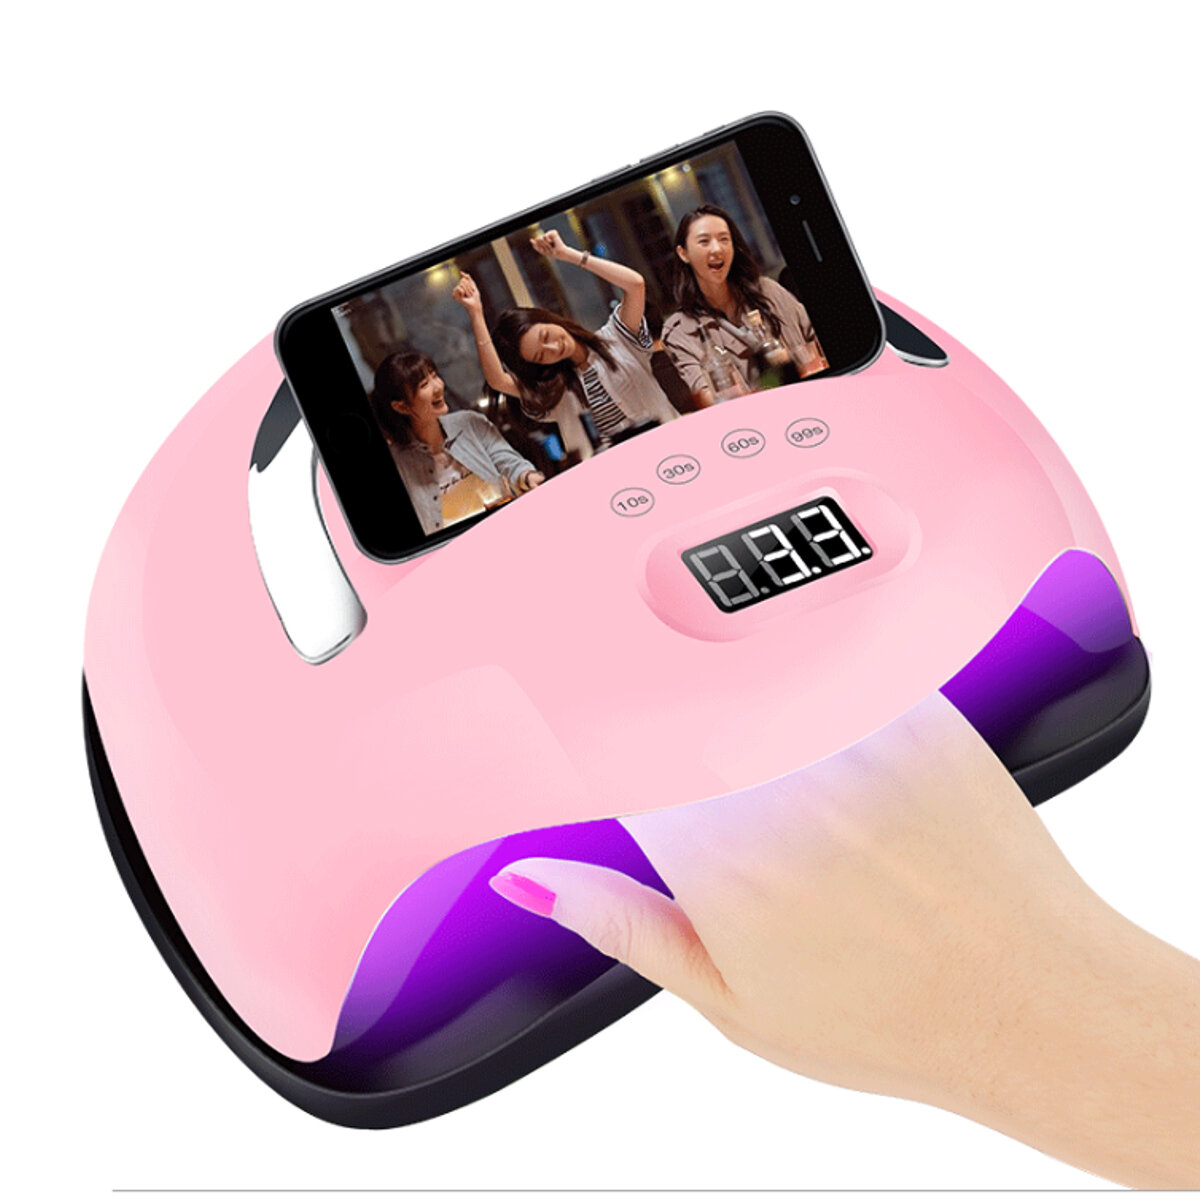 168W Nail Dryer Portable LED UV Nail Lamp USB Polish Acrylic gel Curing Lamp Manicure with Phone hol